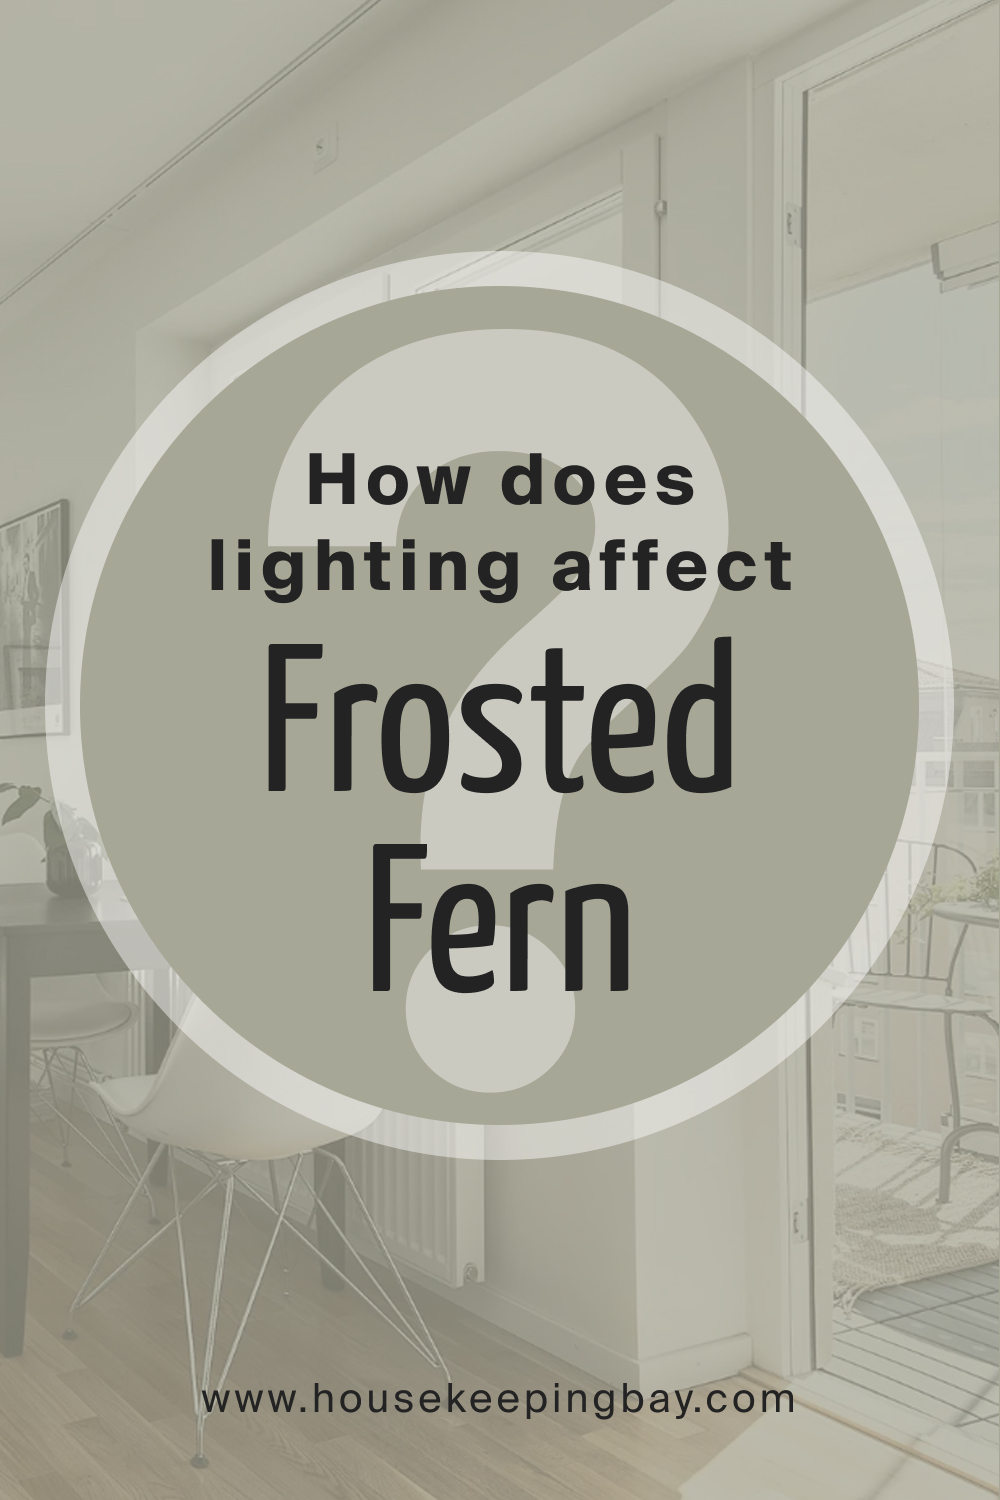 How does lighting affect SW 9648 Frosted Fern